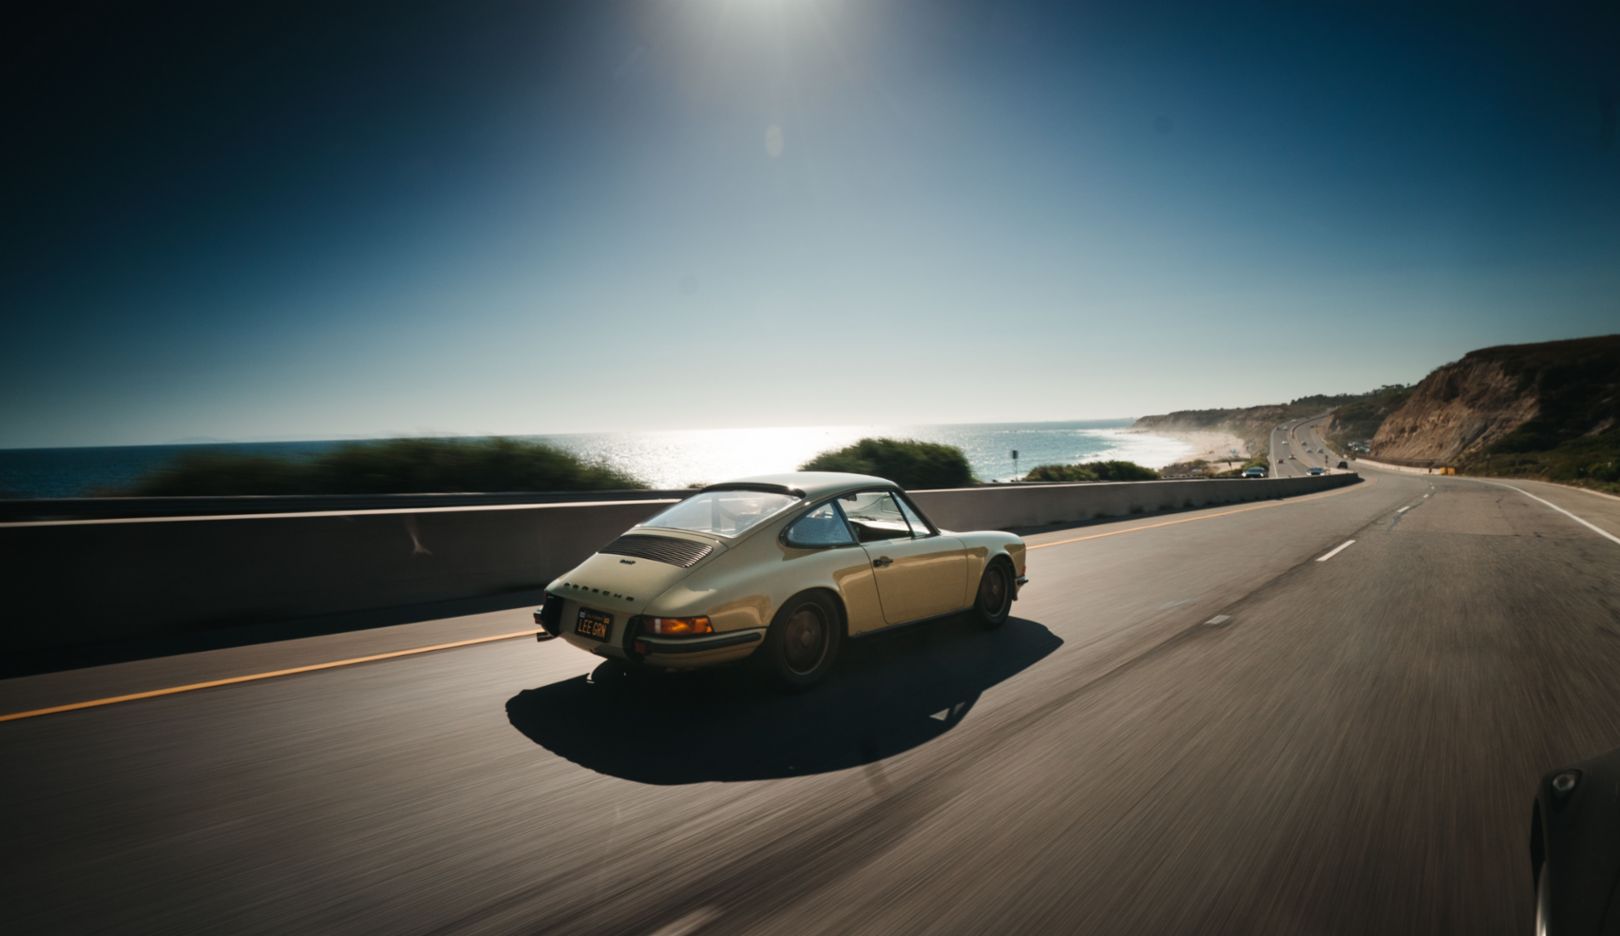 Pacific Coast Highway: engine, wind, and waves. That’s all you need for Porsche happiness.